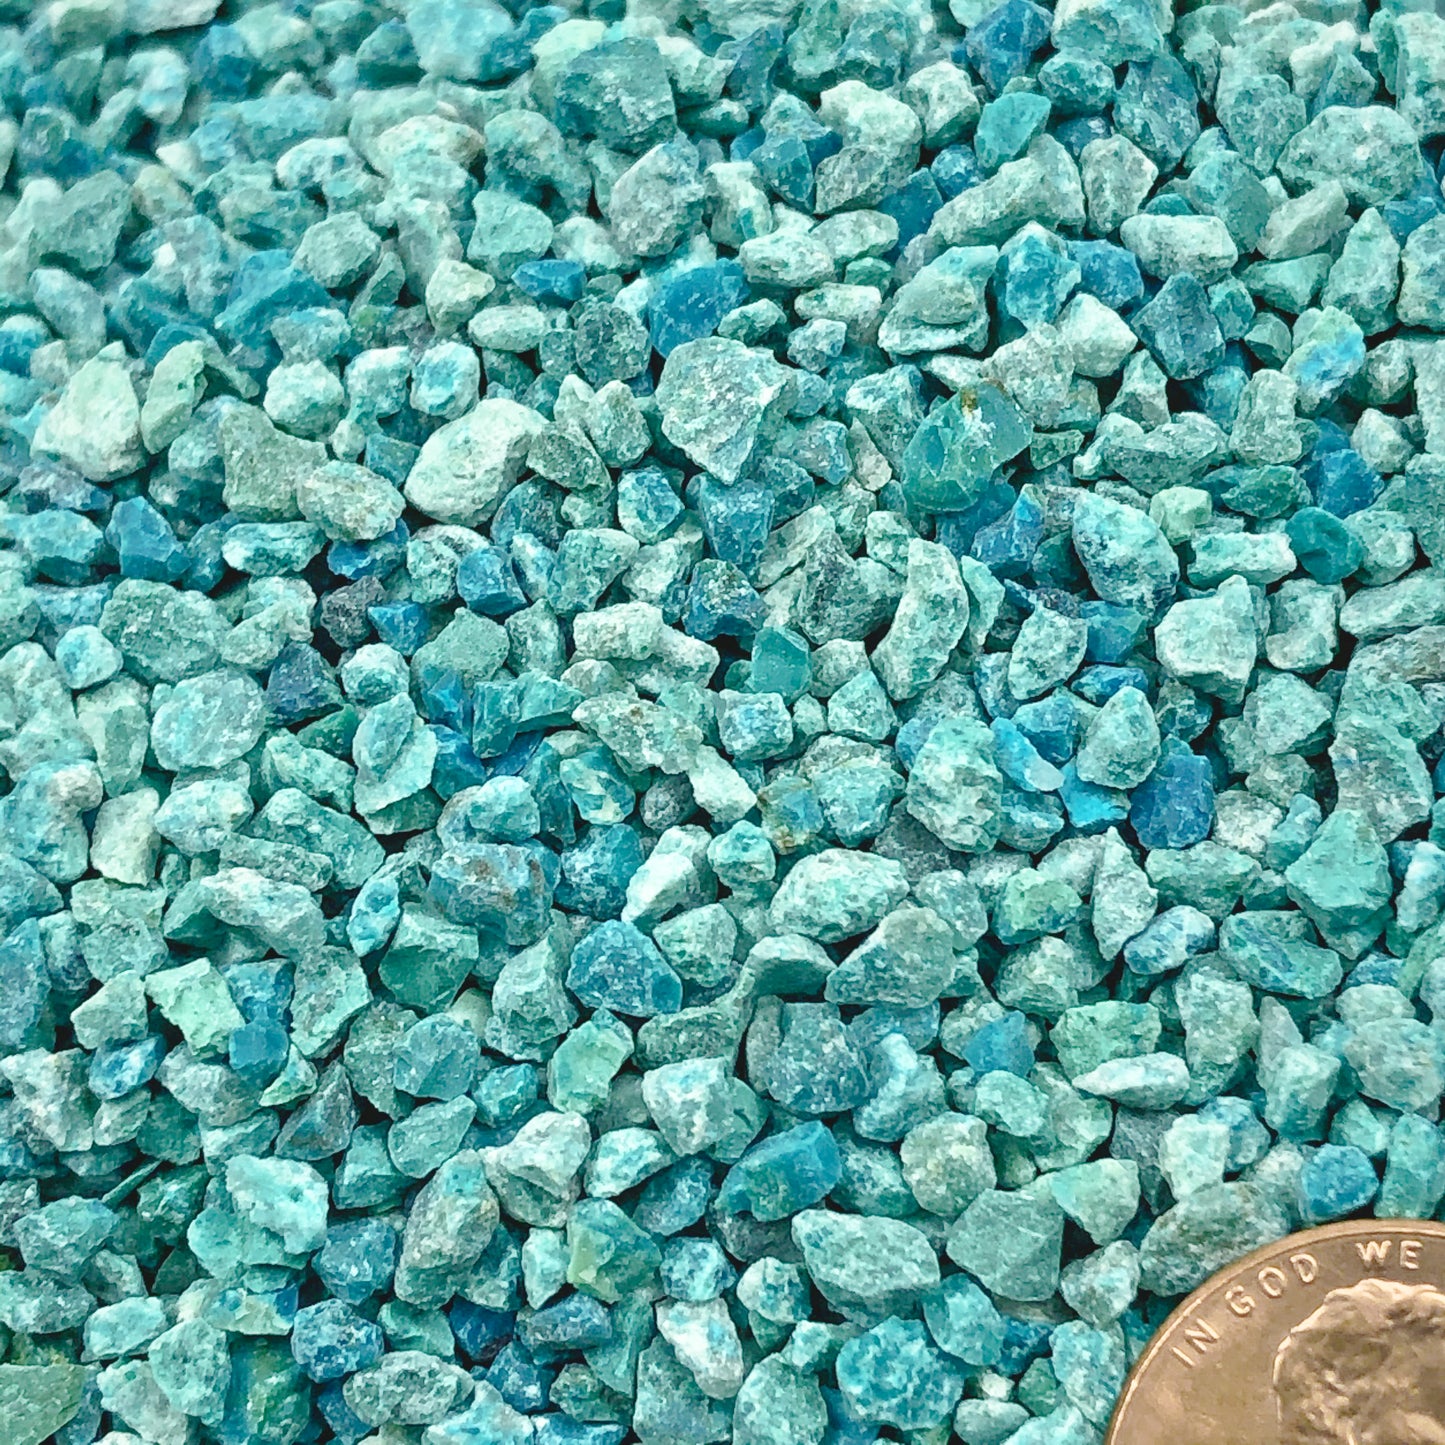 Crushed Mixed Blue-Green Chrysocolla from Peru, Coarse Crush, Gravel Size, 4mm - 2mm